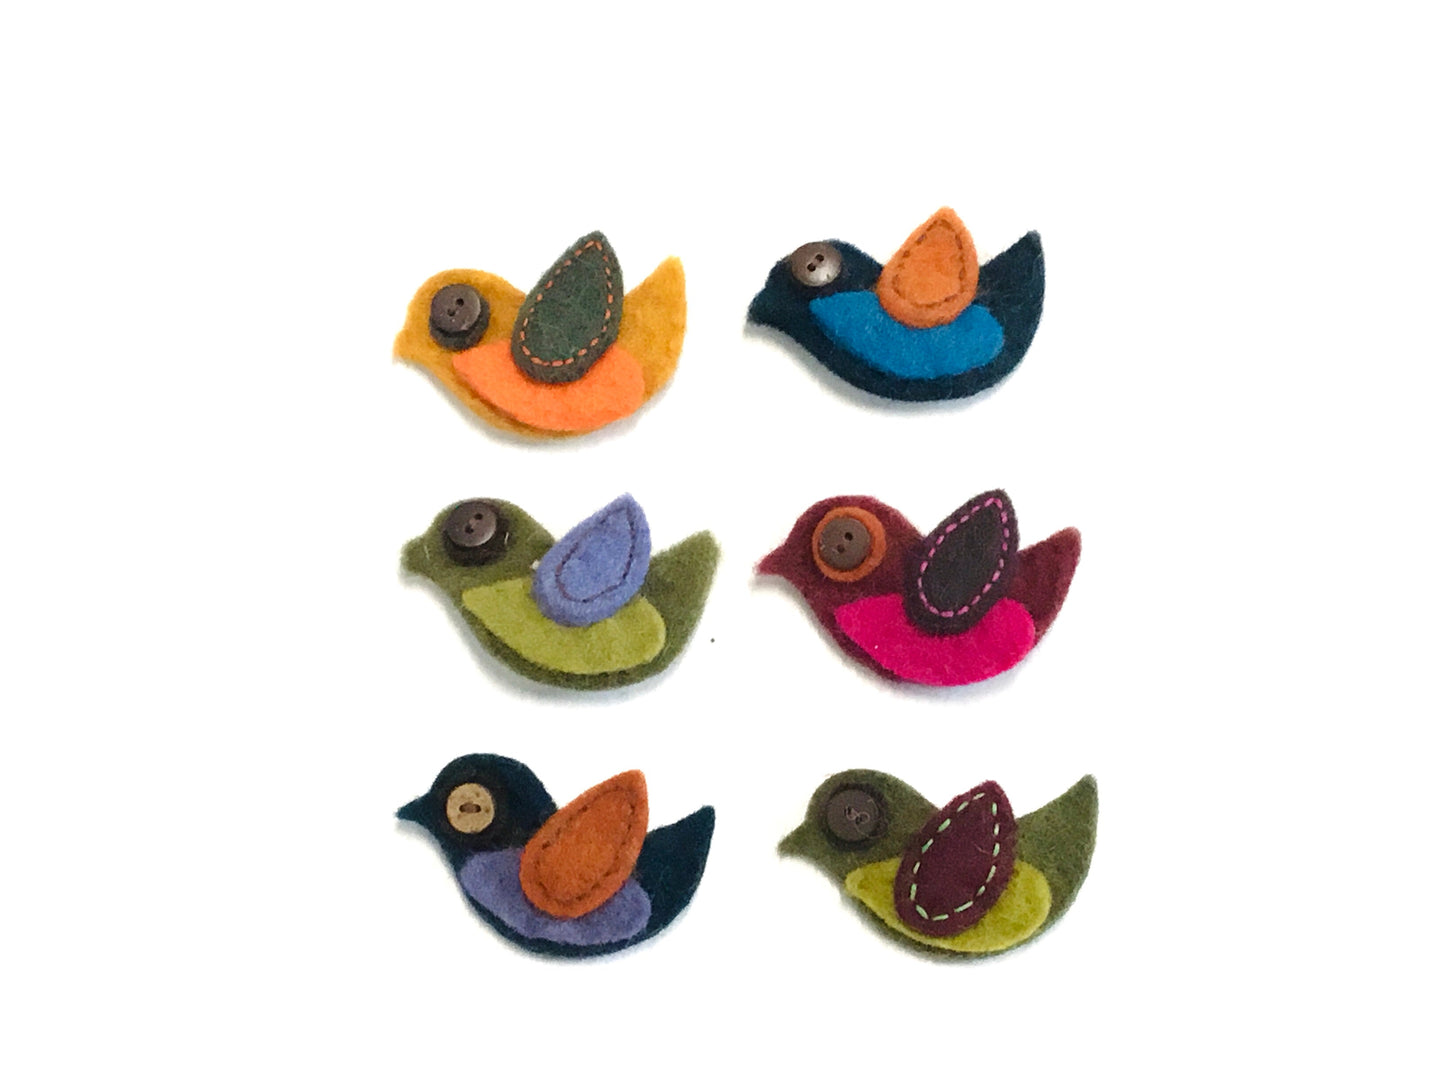 Decorative Wool Birds and Owls - Fibres of Life